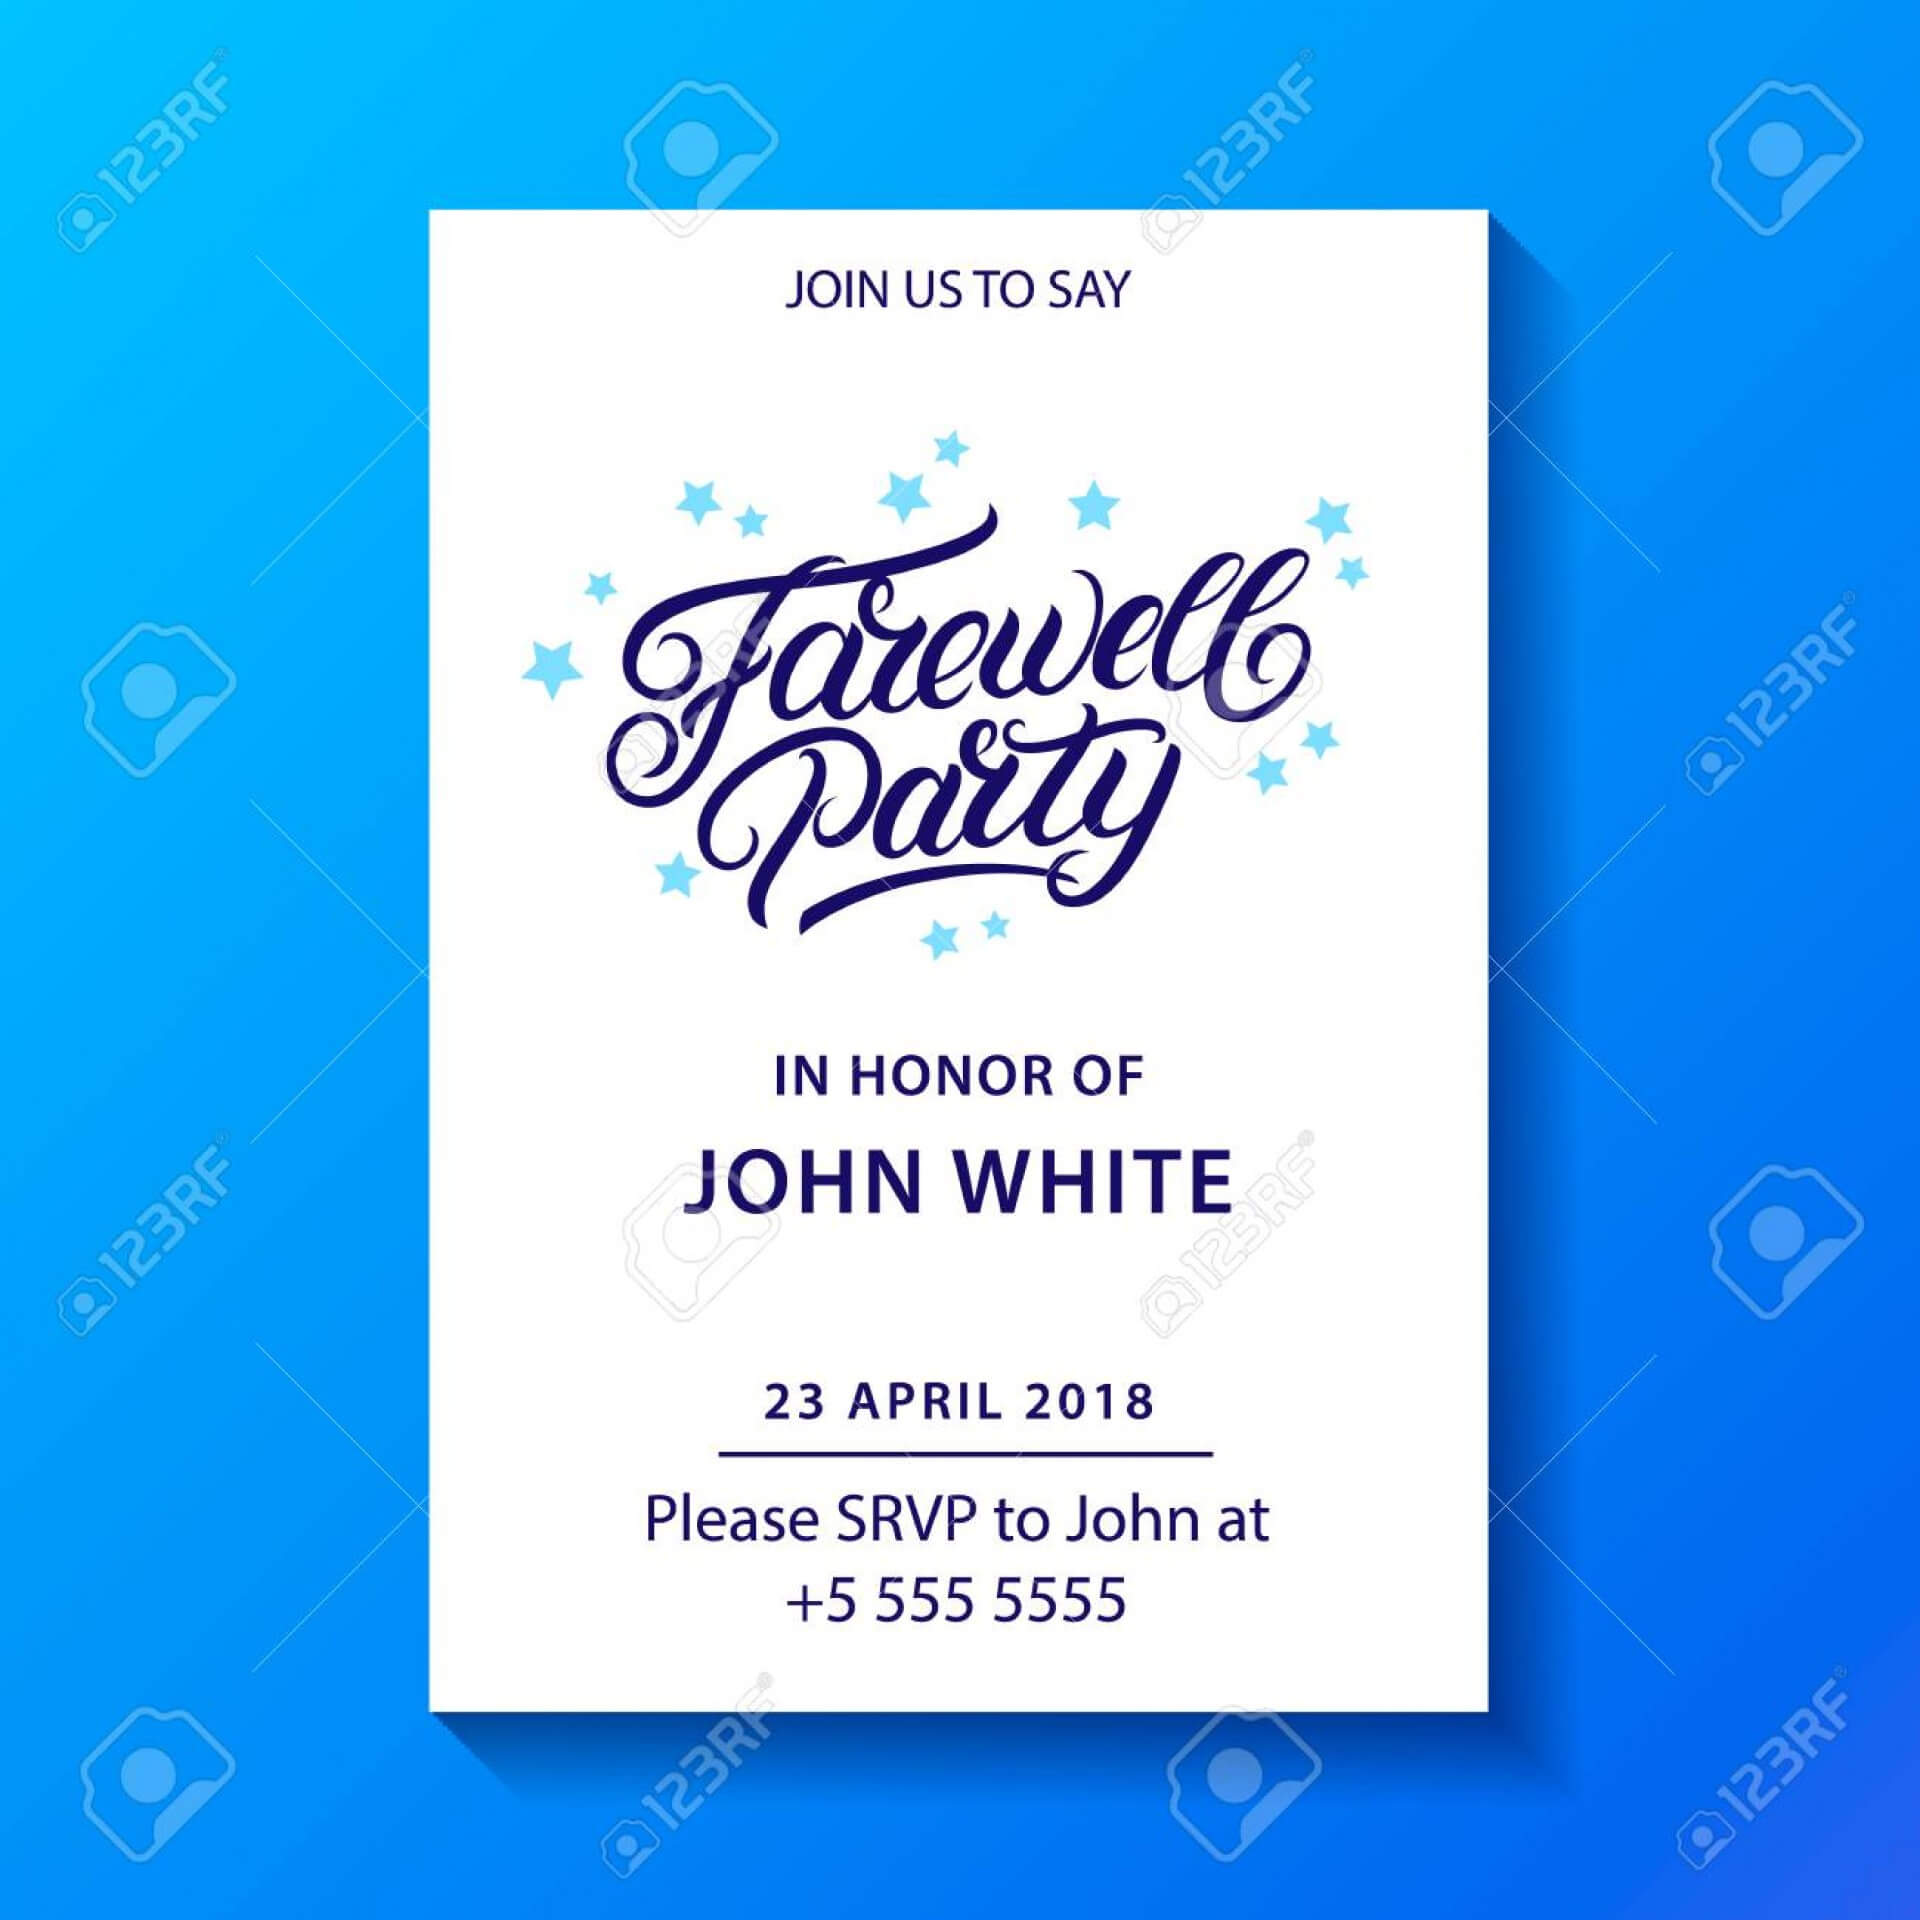 013 Boss Farewell Invitation Daily Motivational Quotes Send With Farewell Invitation Card Template